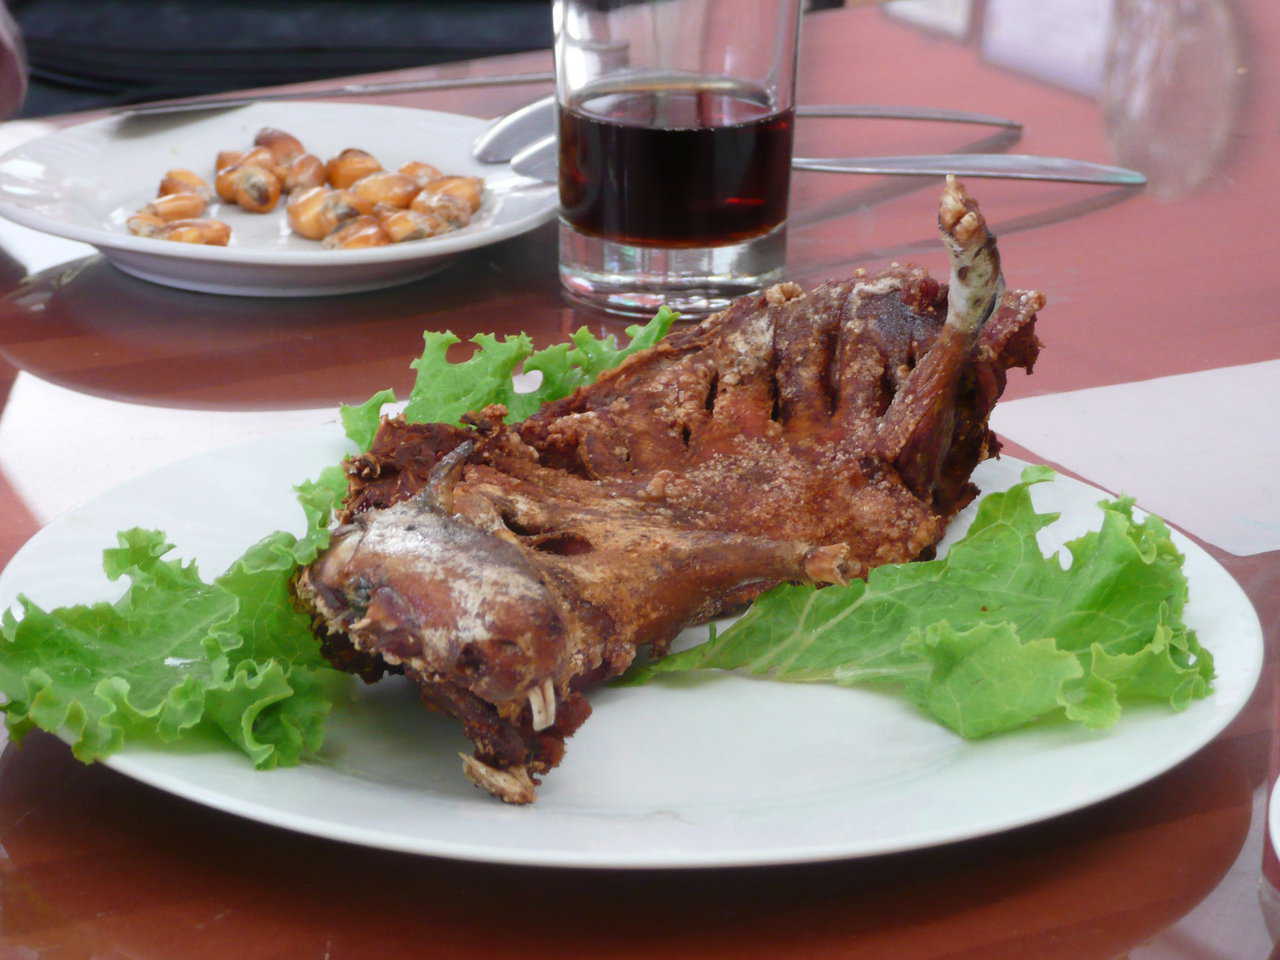 Peruvian Delicacy — During a recent trip to Peru to research the proposed project with SUBE, Mike South (Monolithic Vice-President) asked a waiter for some local fare for dinner.  His meal, shown here, was baked guinea pig.
CUY (pron: cu-i) is a traditional Peruvian meal.  Cuys (or Guinea Pigs) are often raised by Peruvians for special occasions, and can now be purchased, nicely packaged, in super markets (right next to the chicken feet).